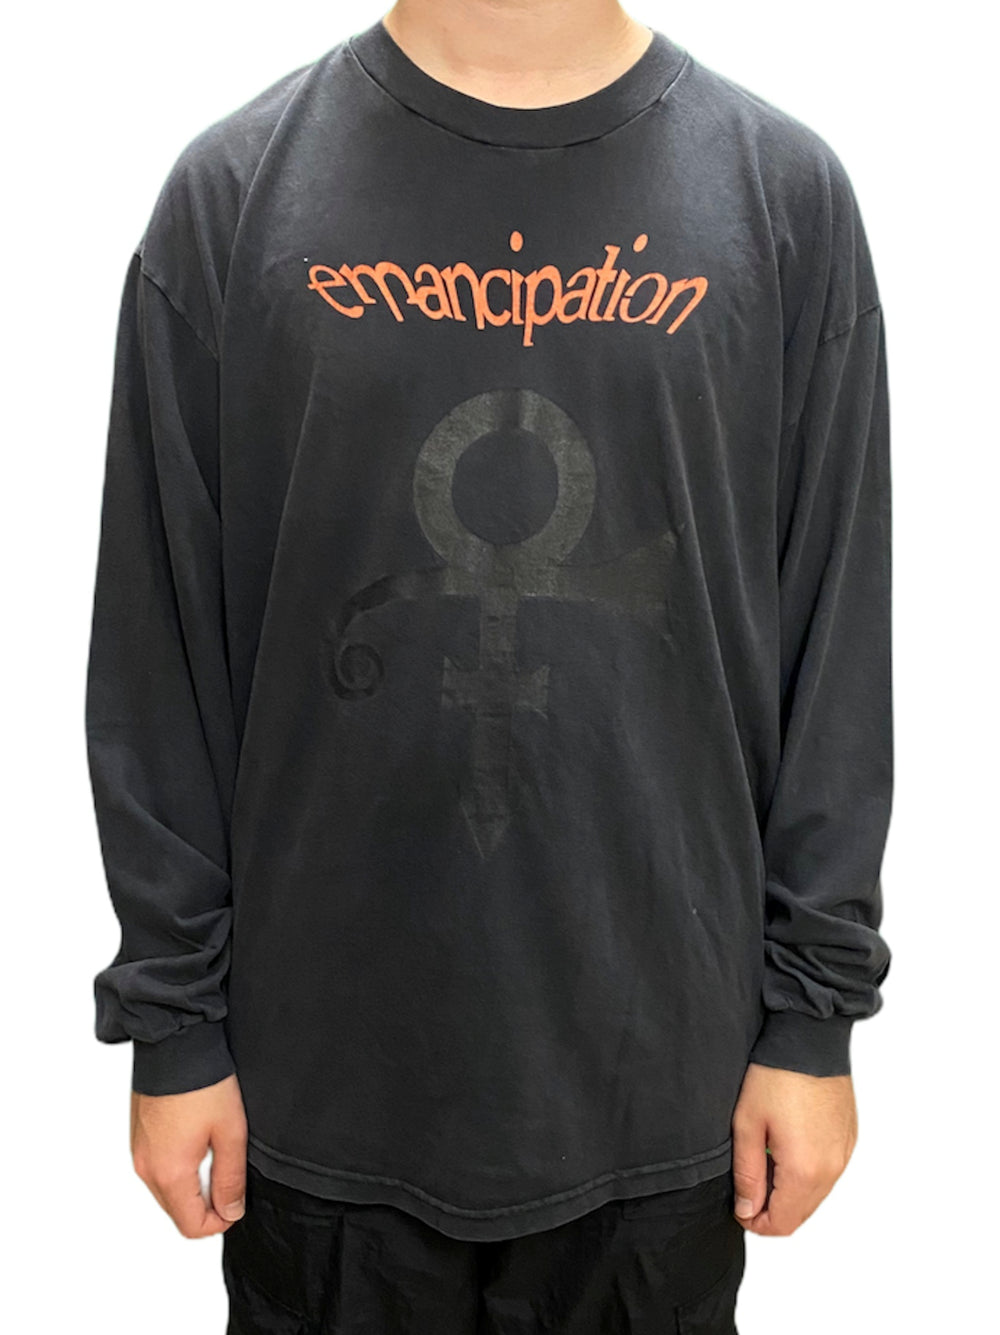 Prince – O(+>Emancipation Official Long Sleeved Shirt Size X Large Pre-Loved